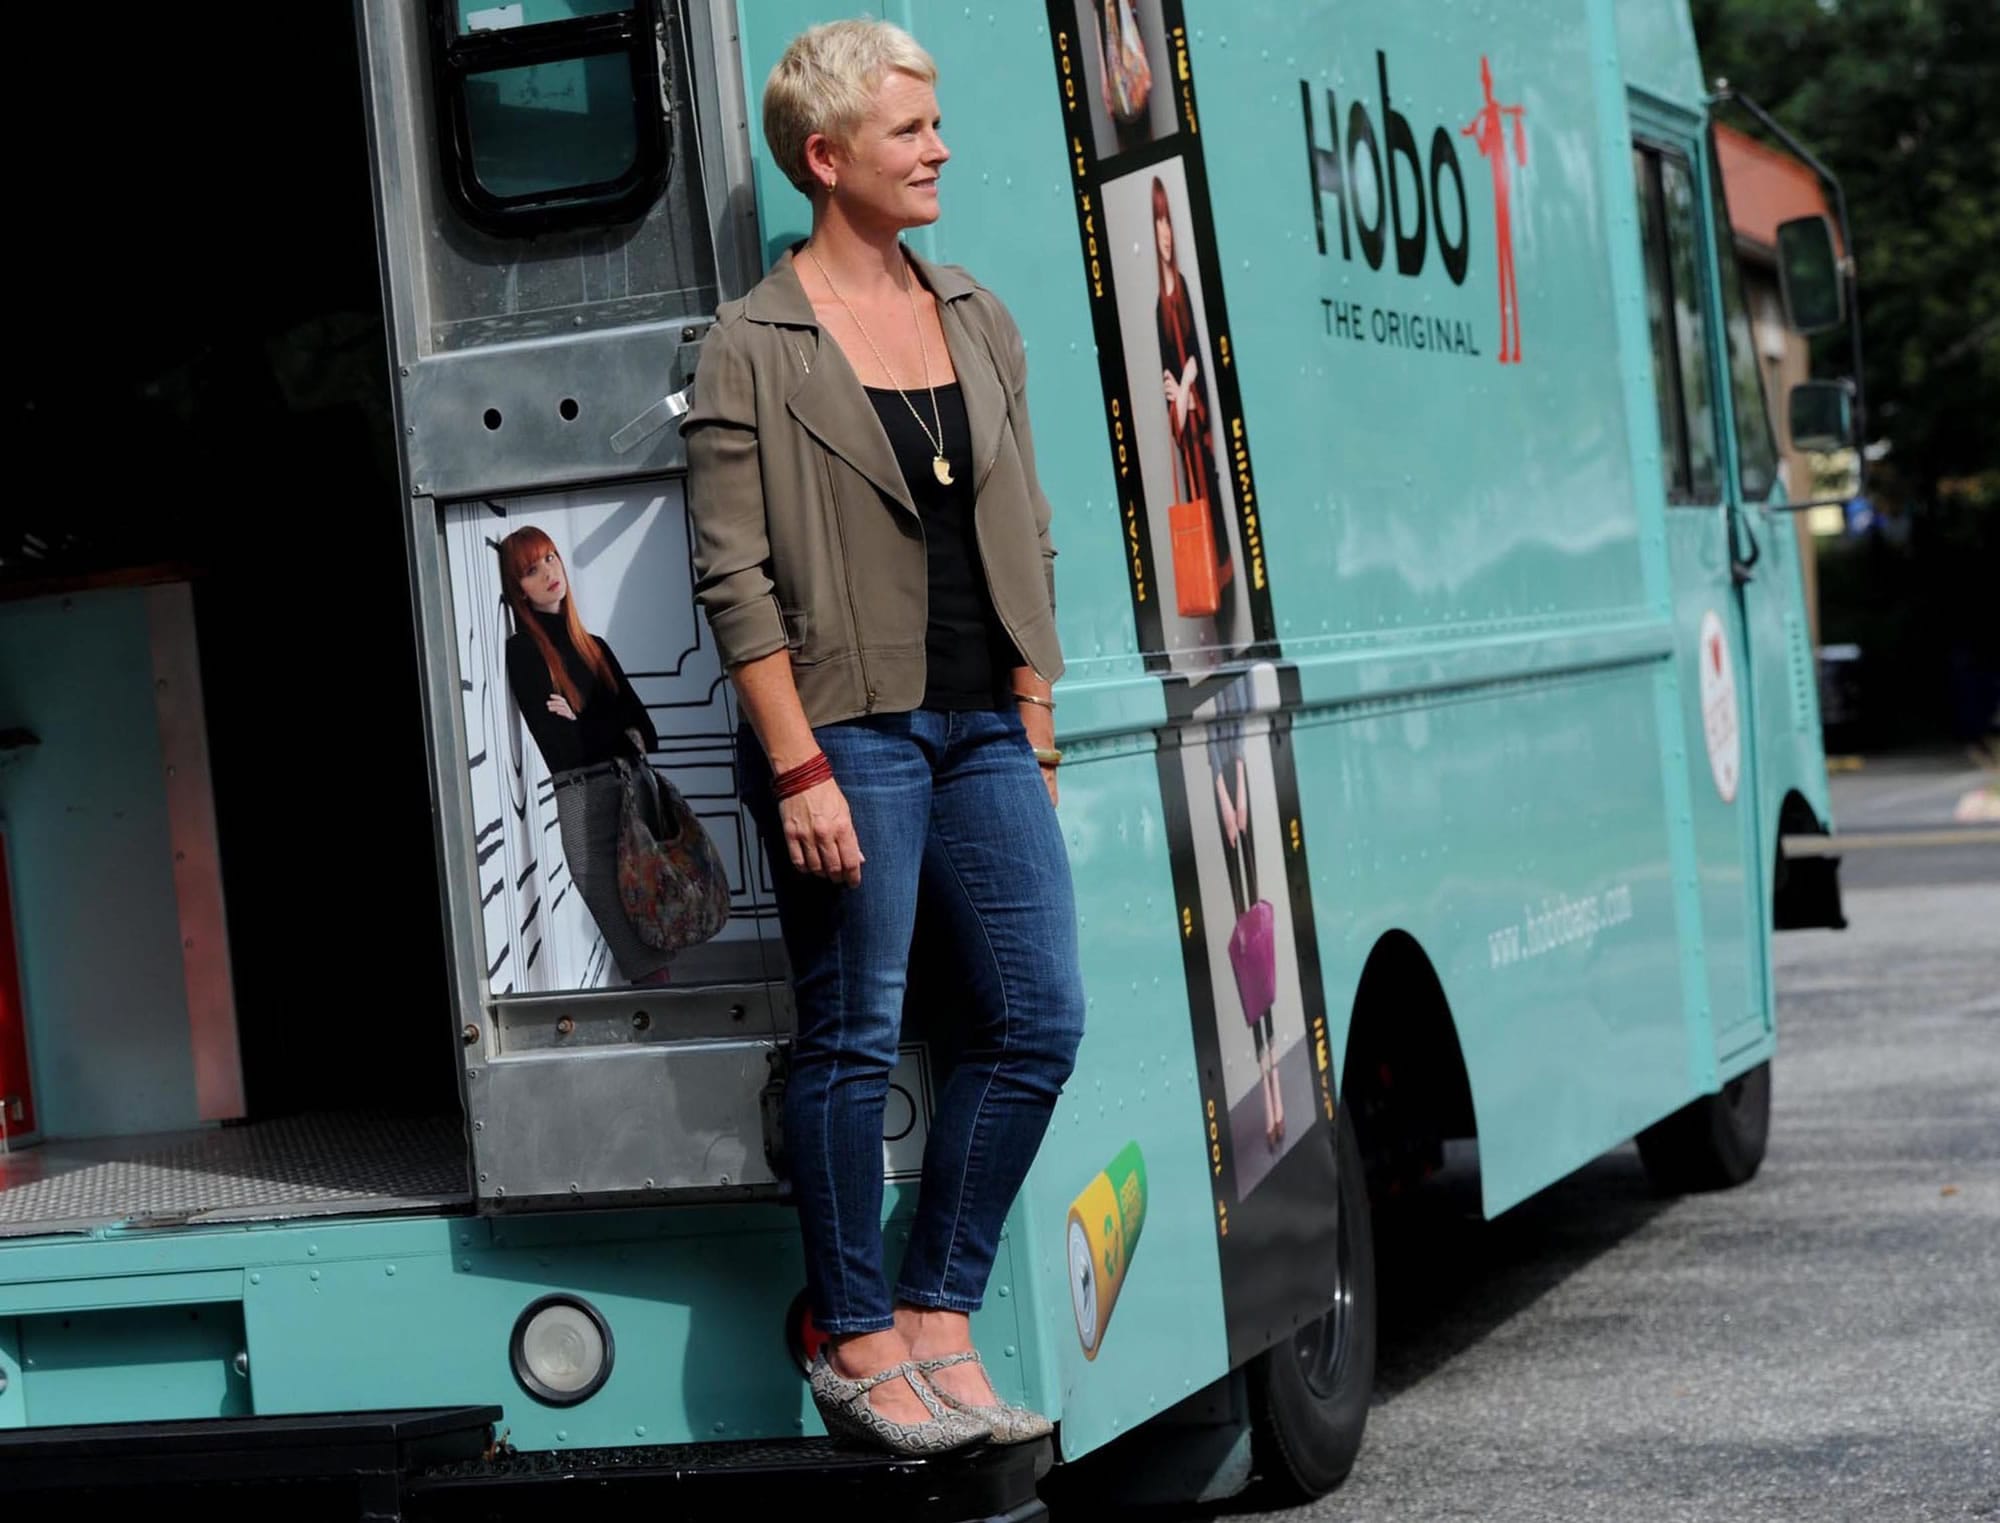 Koren Ray, pictured Aug. 16 in Annapolis, Md., owner of Hobo International accessories truck, will use the truck as a mobile showroom.